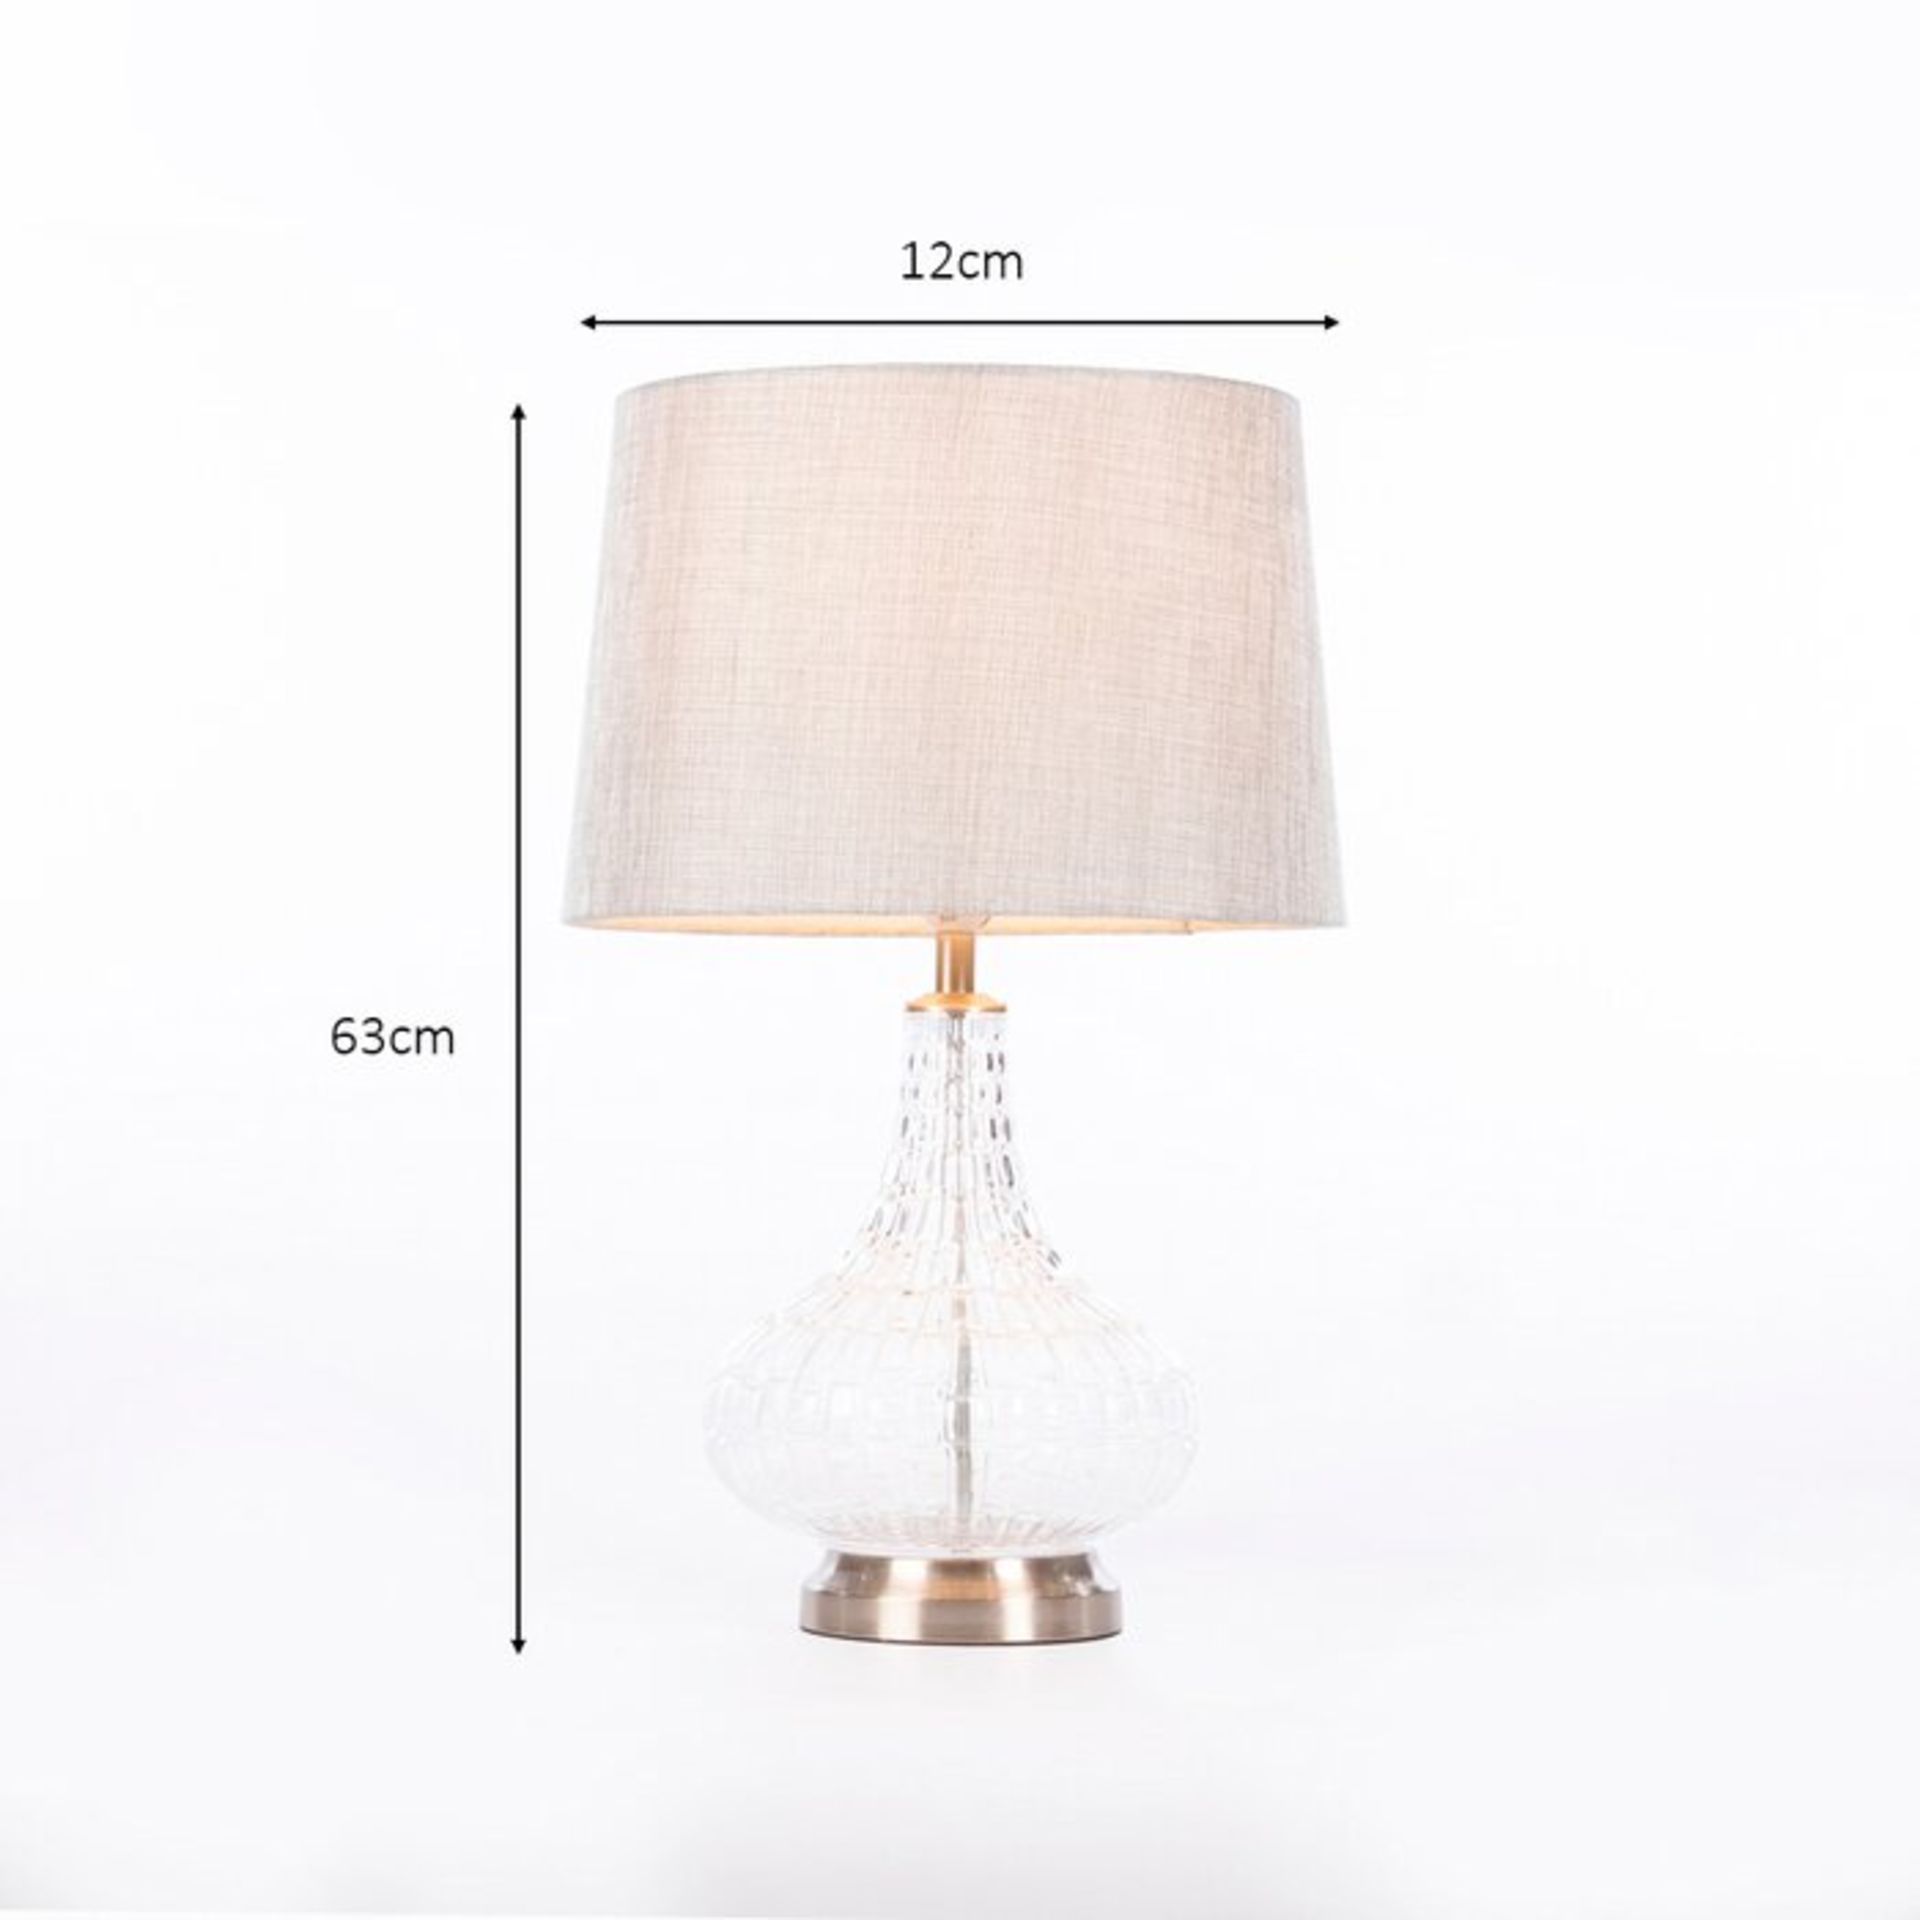 Amarion 63cm Table Lamp x 2 - RRP £106.99 Each - Image 2 of 2